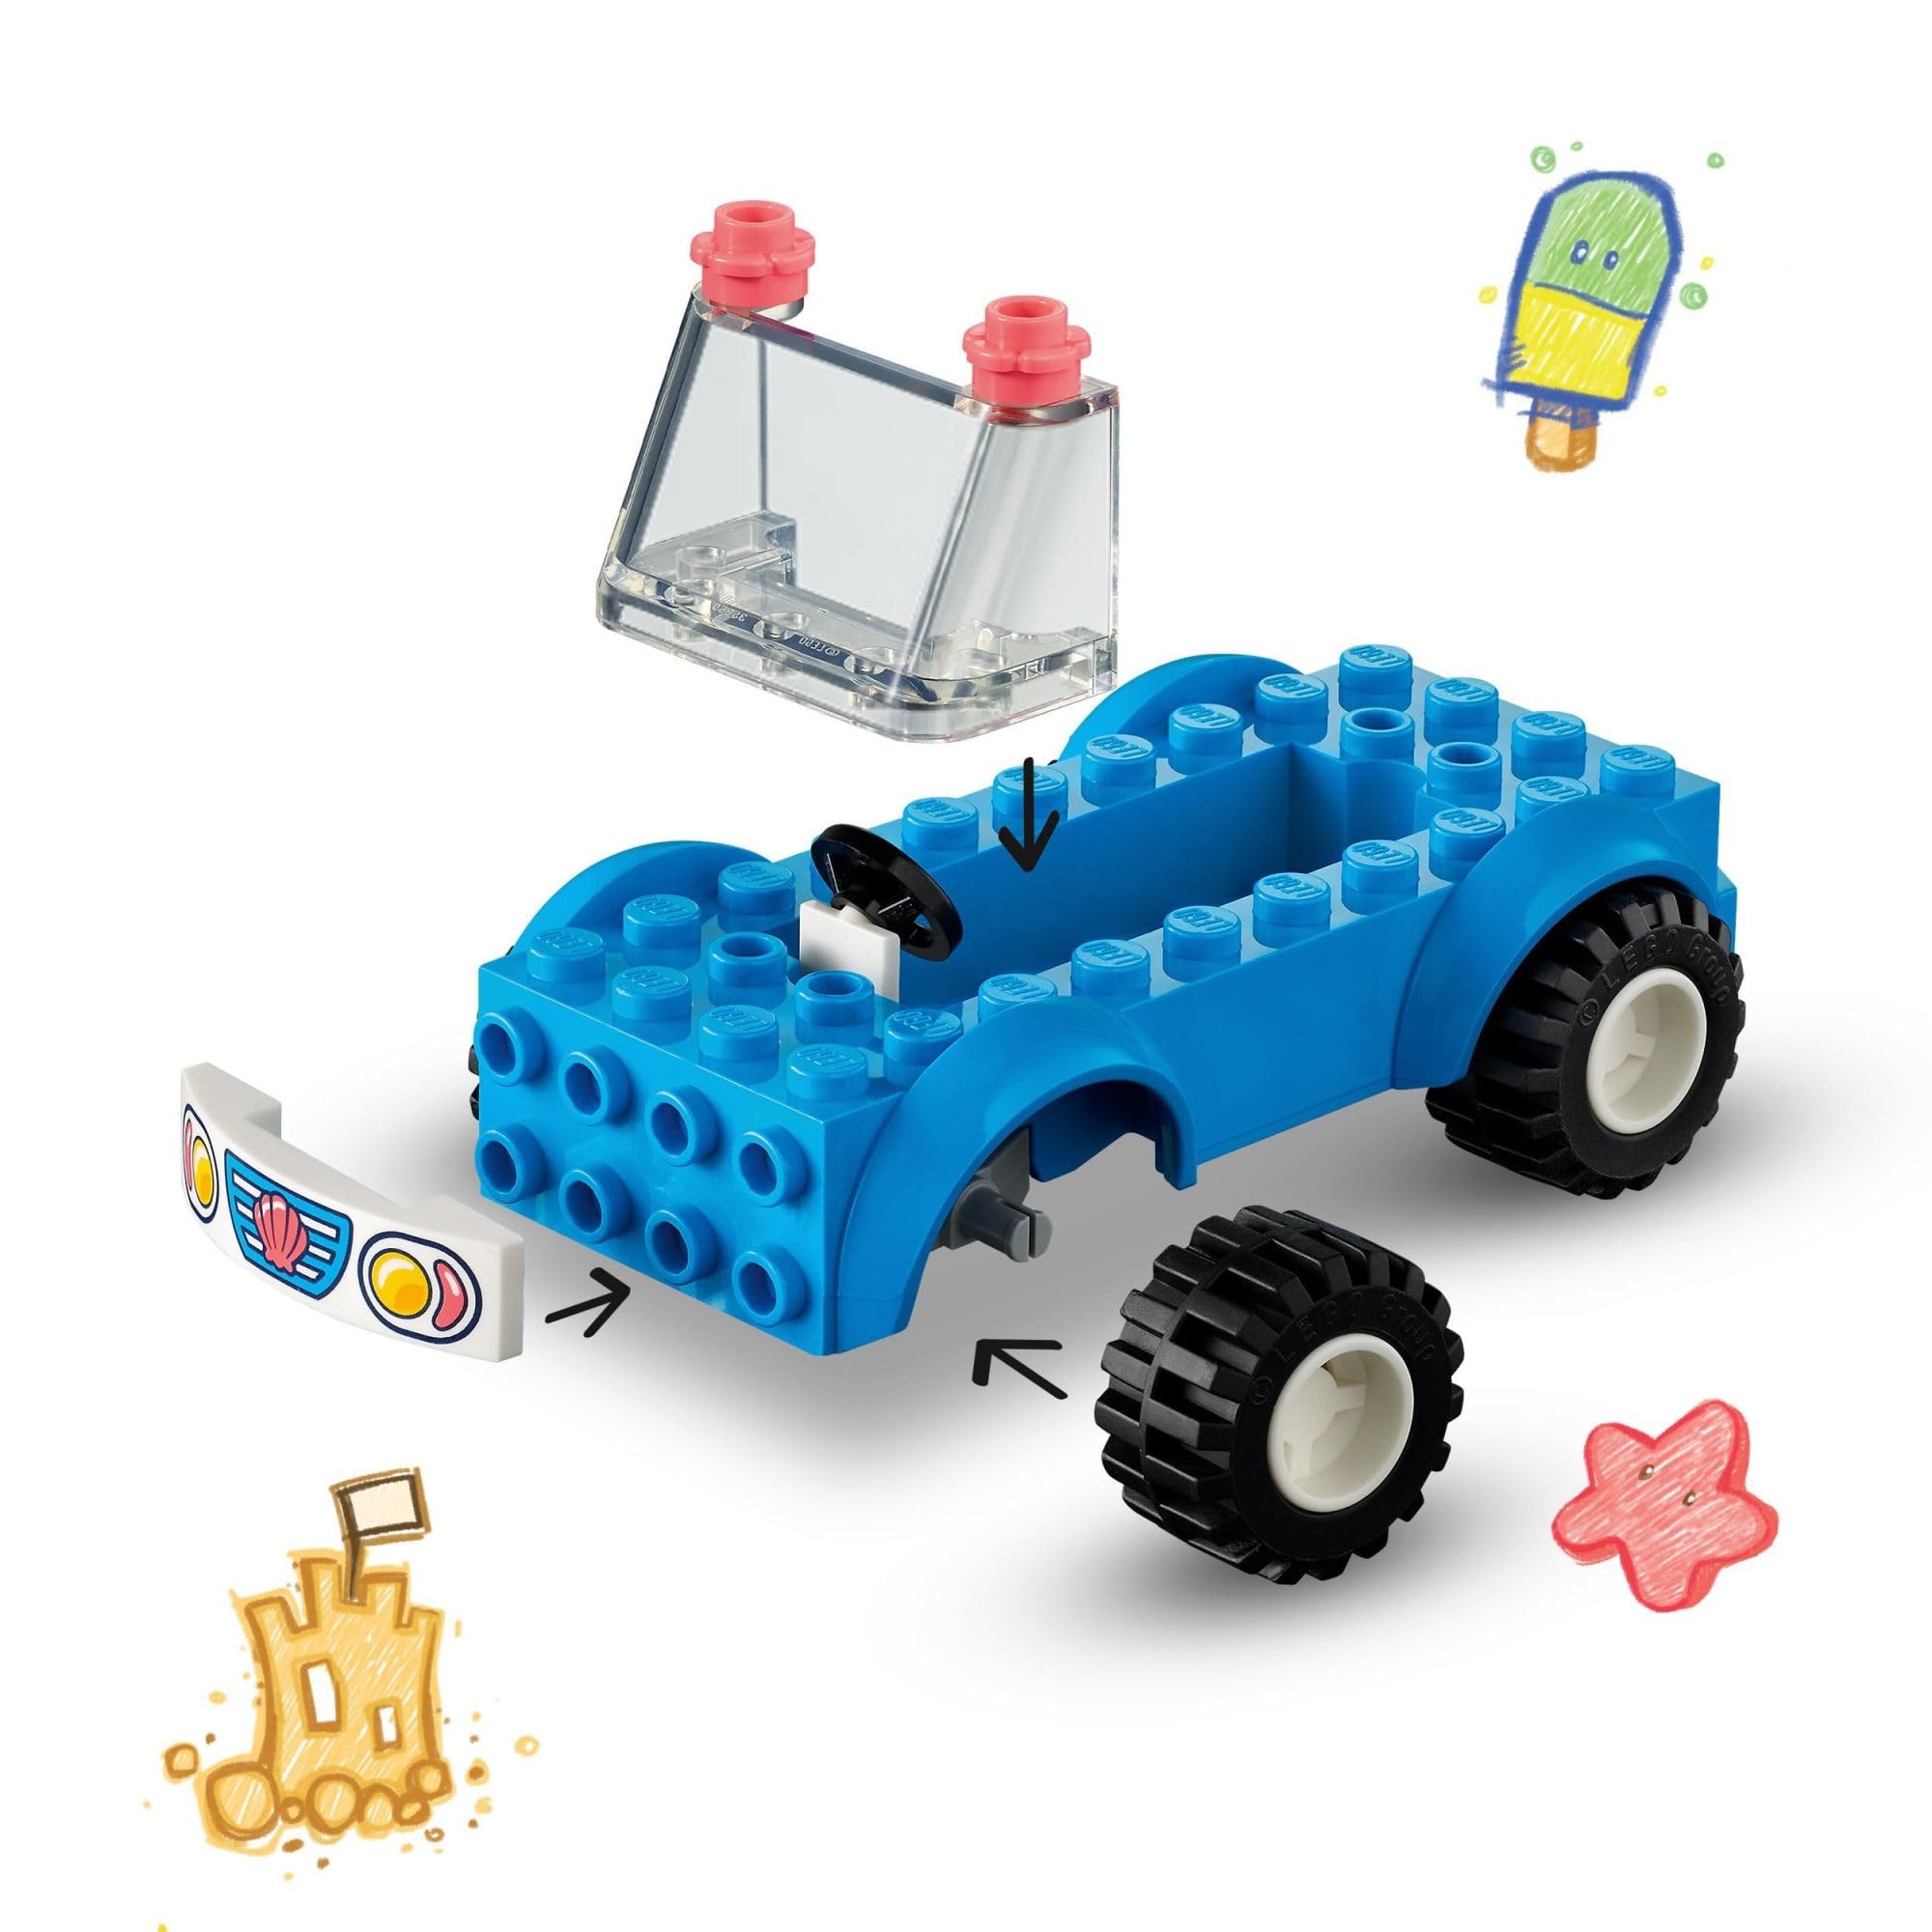 LEGO Friends Beach Buggy Fun 41725 Building Toy Set, Creative Fun for Toddlers Ages 4+, with 2 Mini-Dolls, Pet Dog and Dolphin Figures, a Beach Buggy Toy Car and Accessories